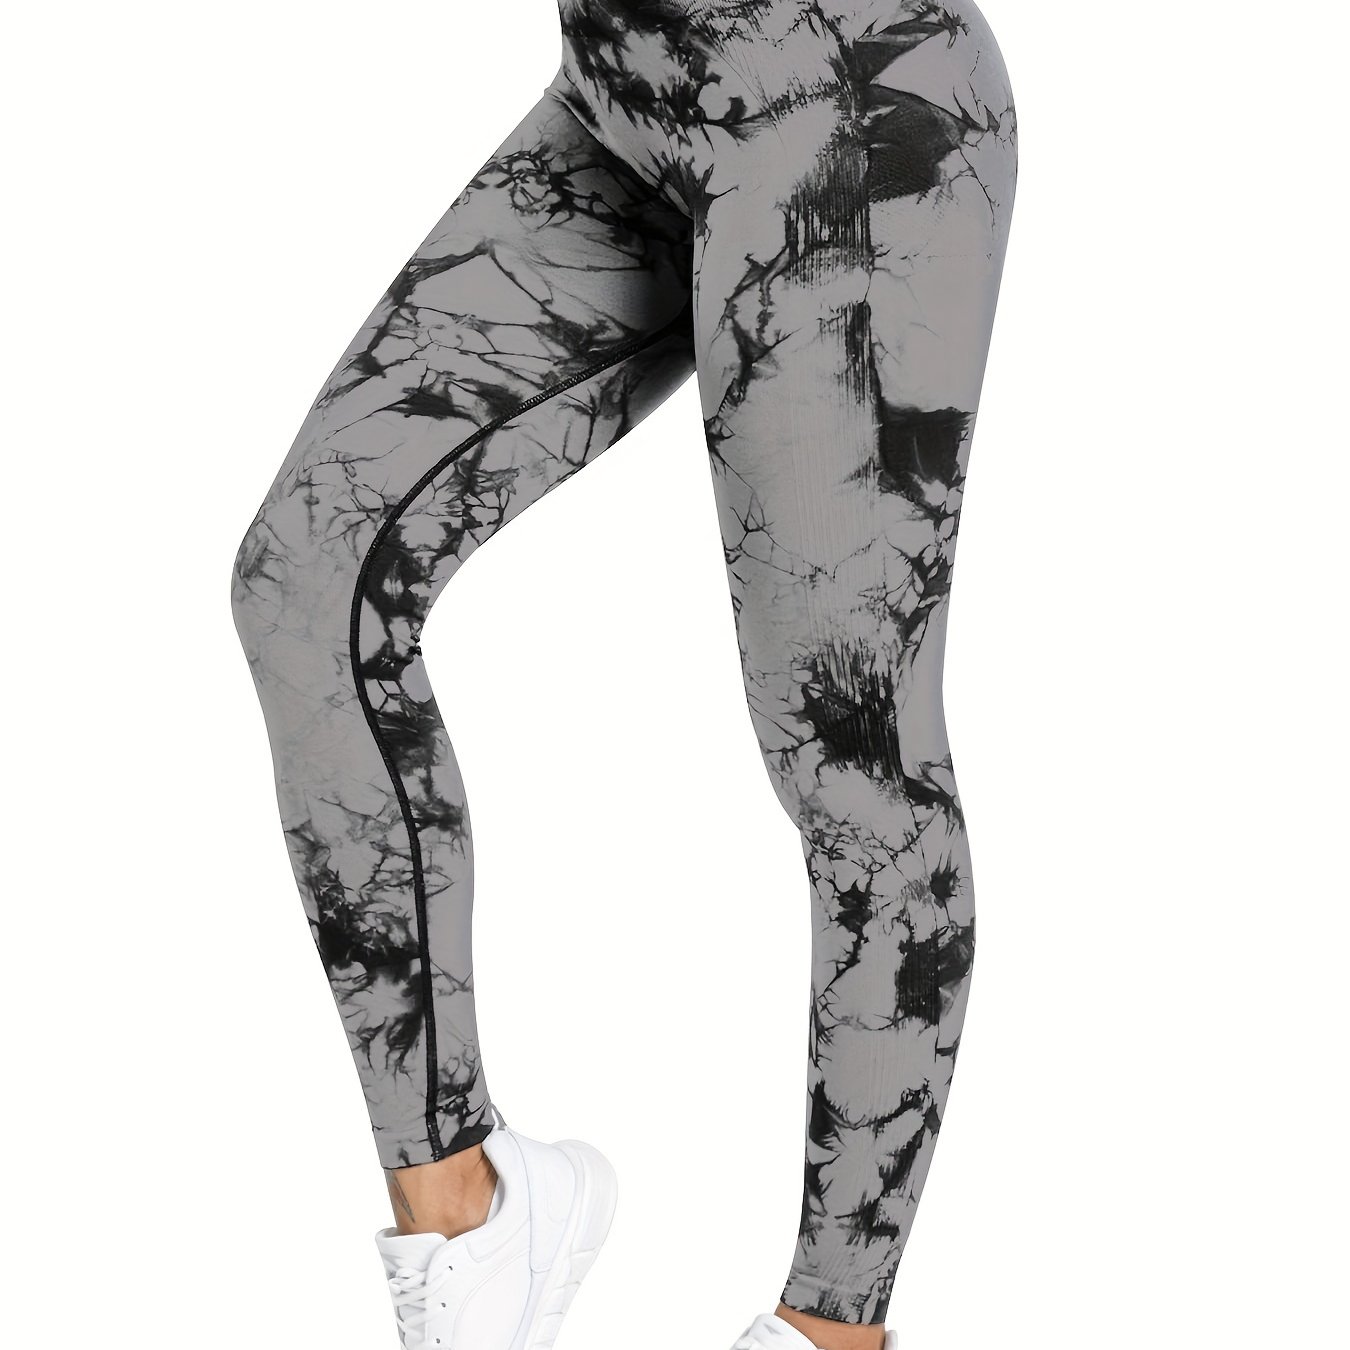 NWT Balance Collection Leggings White and Gray Marble Tie Dye Size M Medium